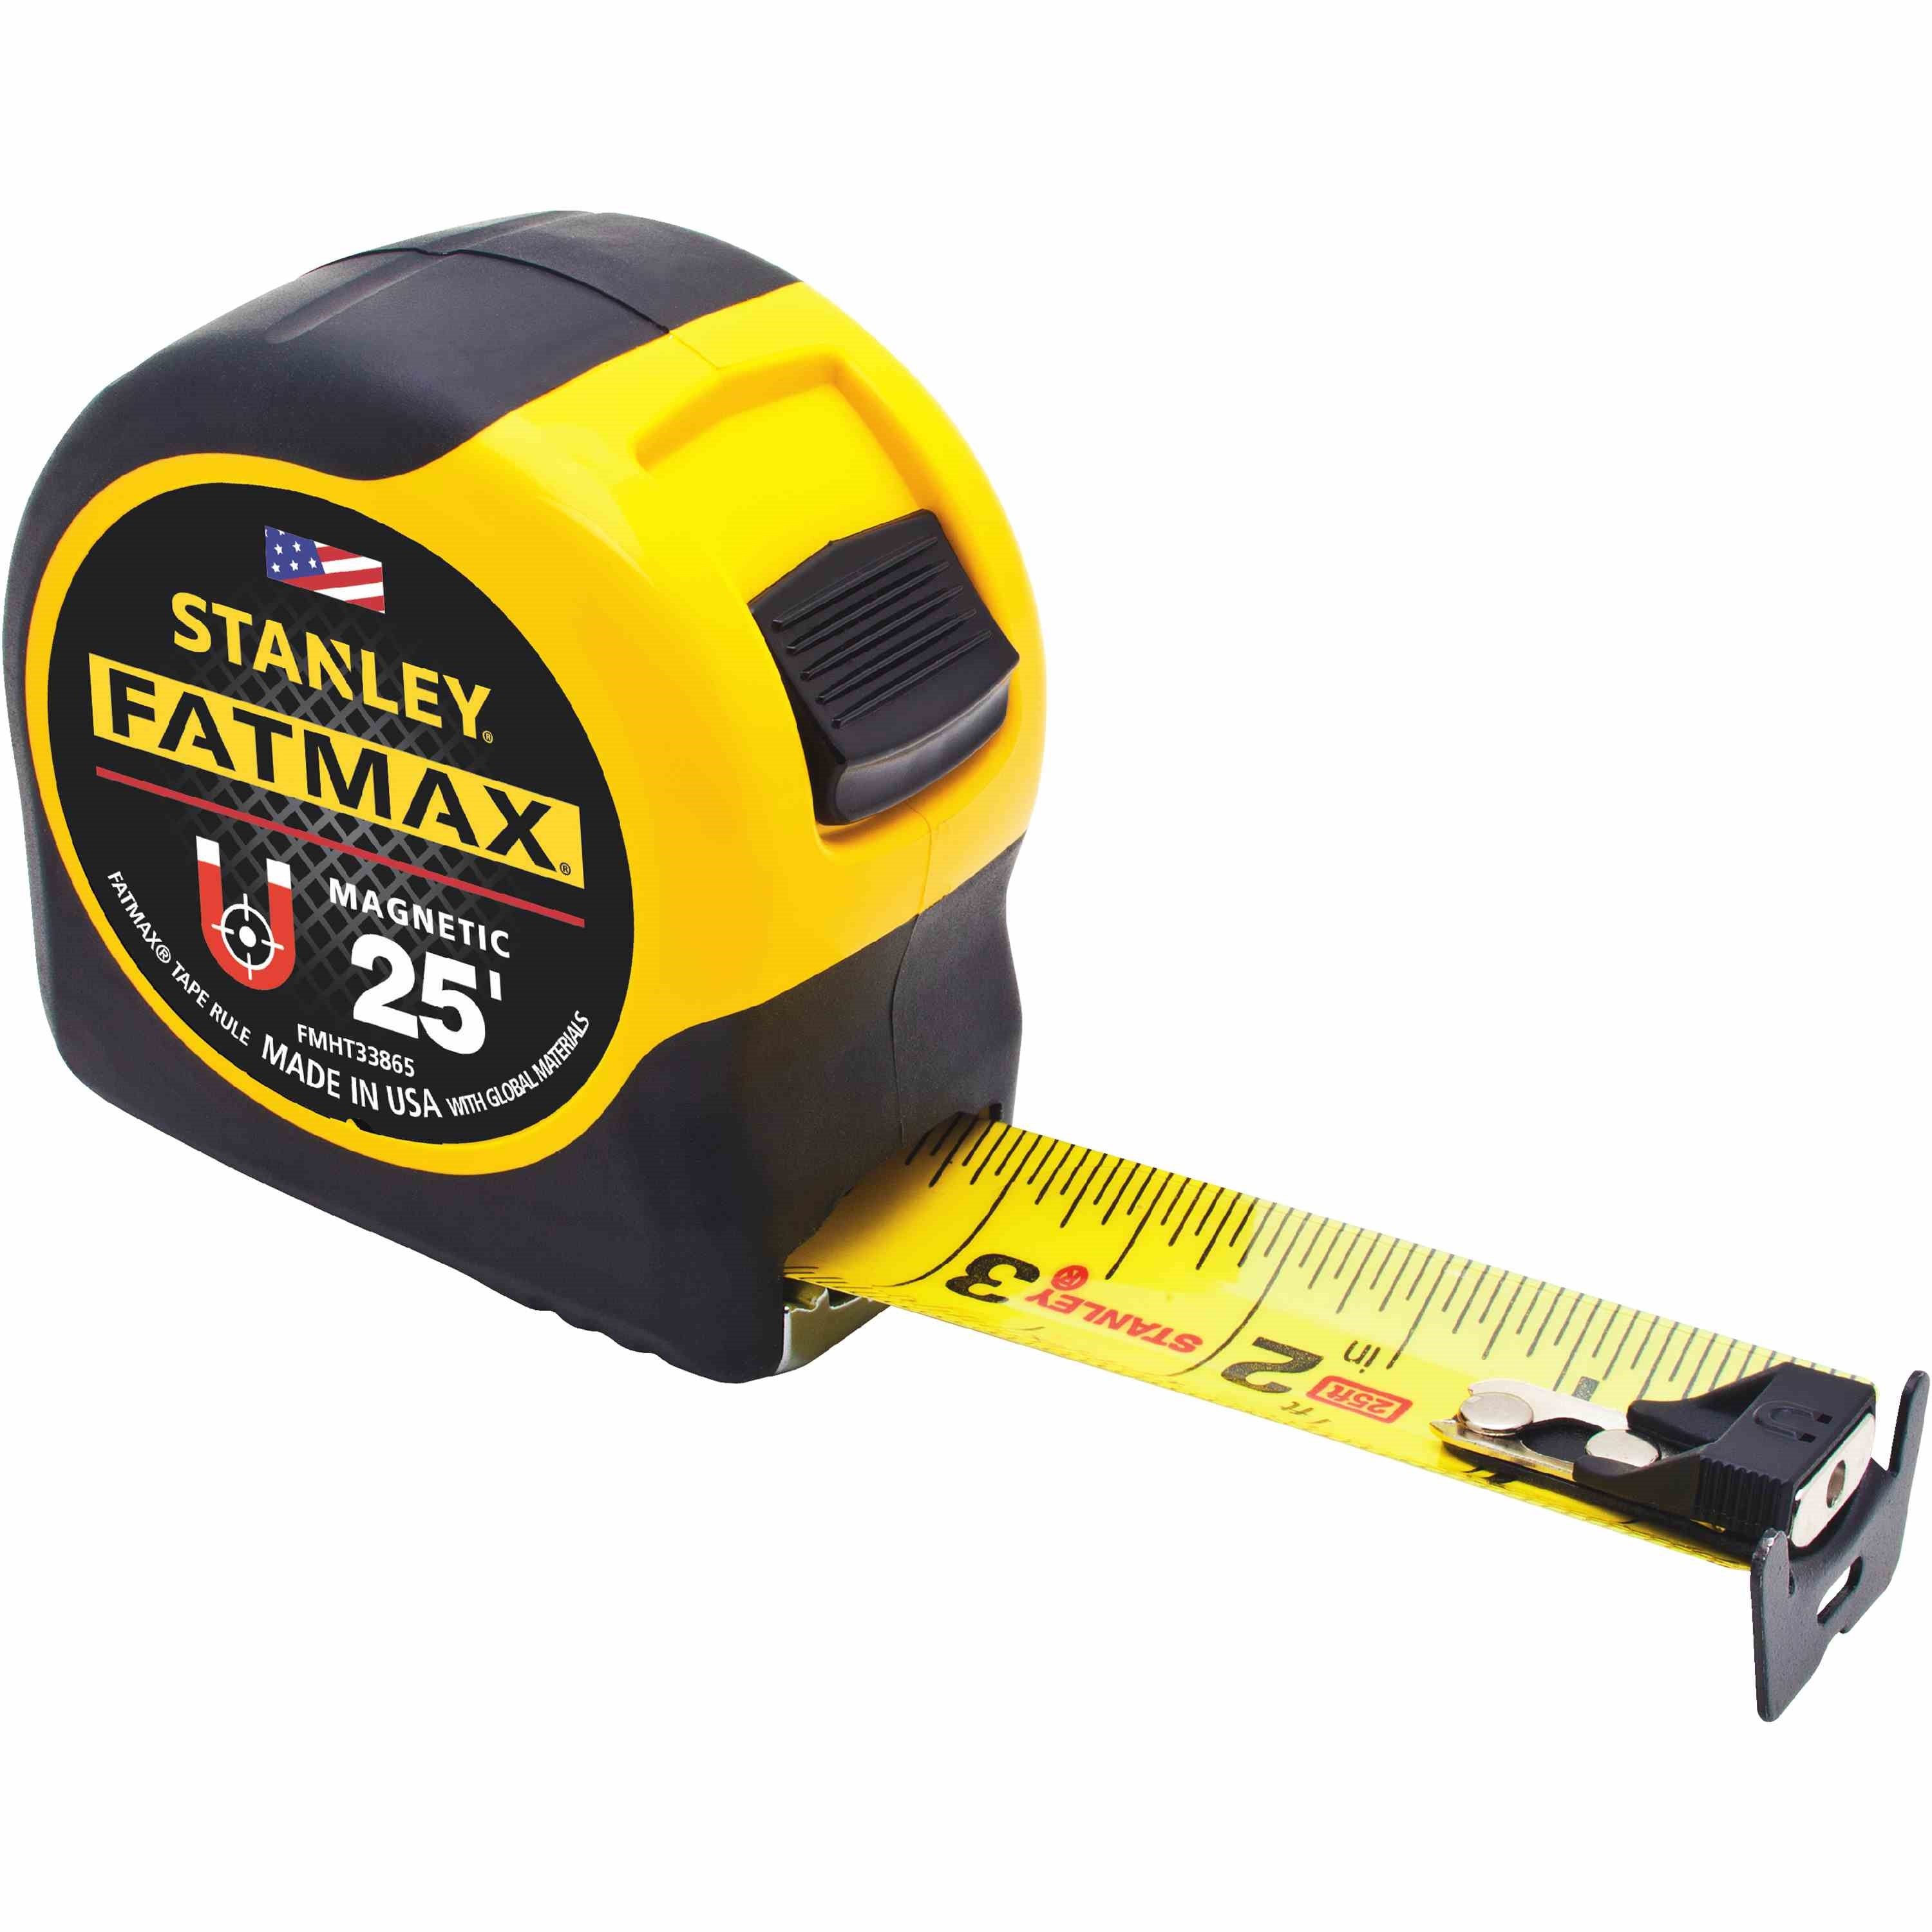 STANLEY  FMHT33865S  -  25 FT. FATMAX® MAGNETIC TAPE - wise-line-tools